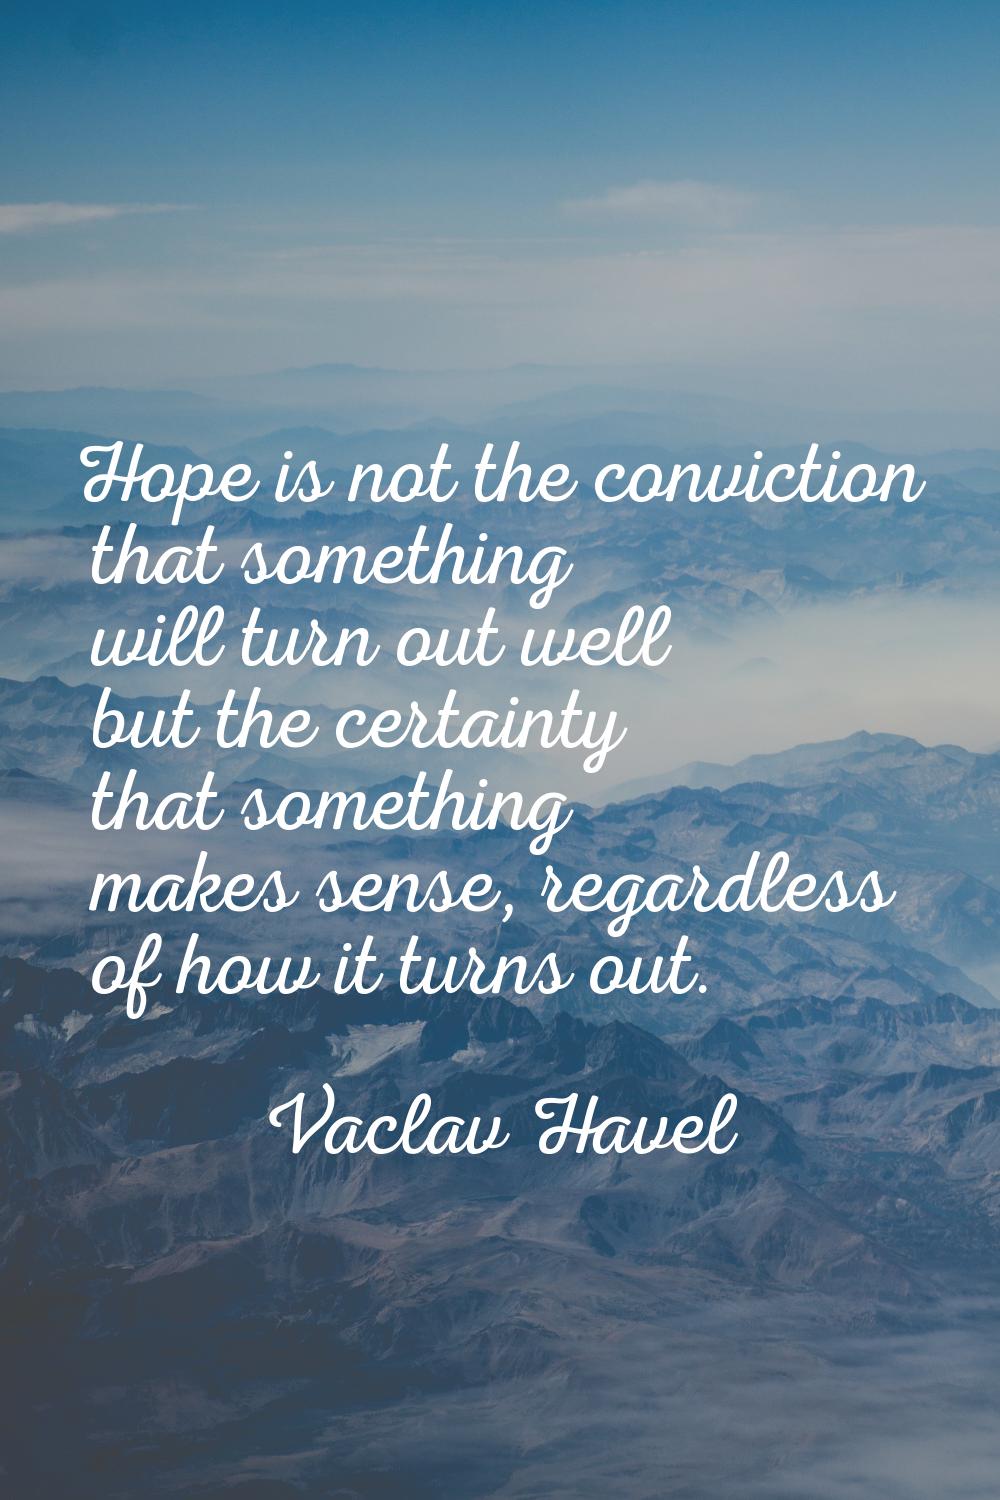 Hope is not the conviction that something will turn out well but the certainty that something makes